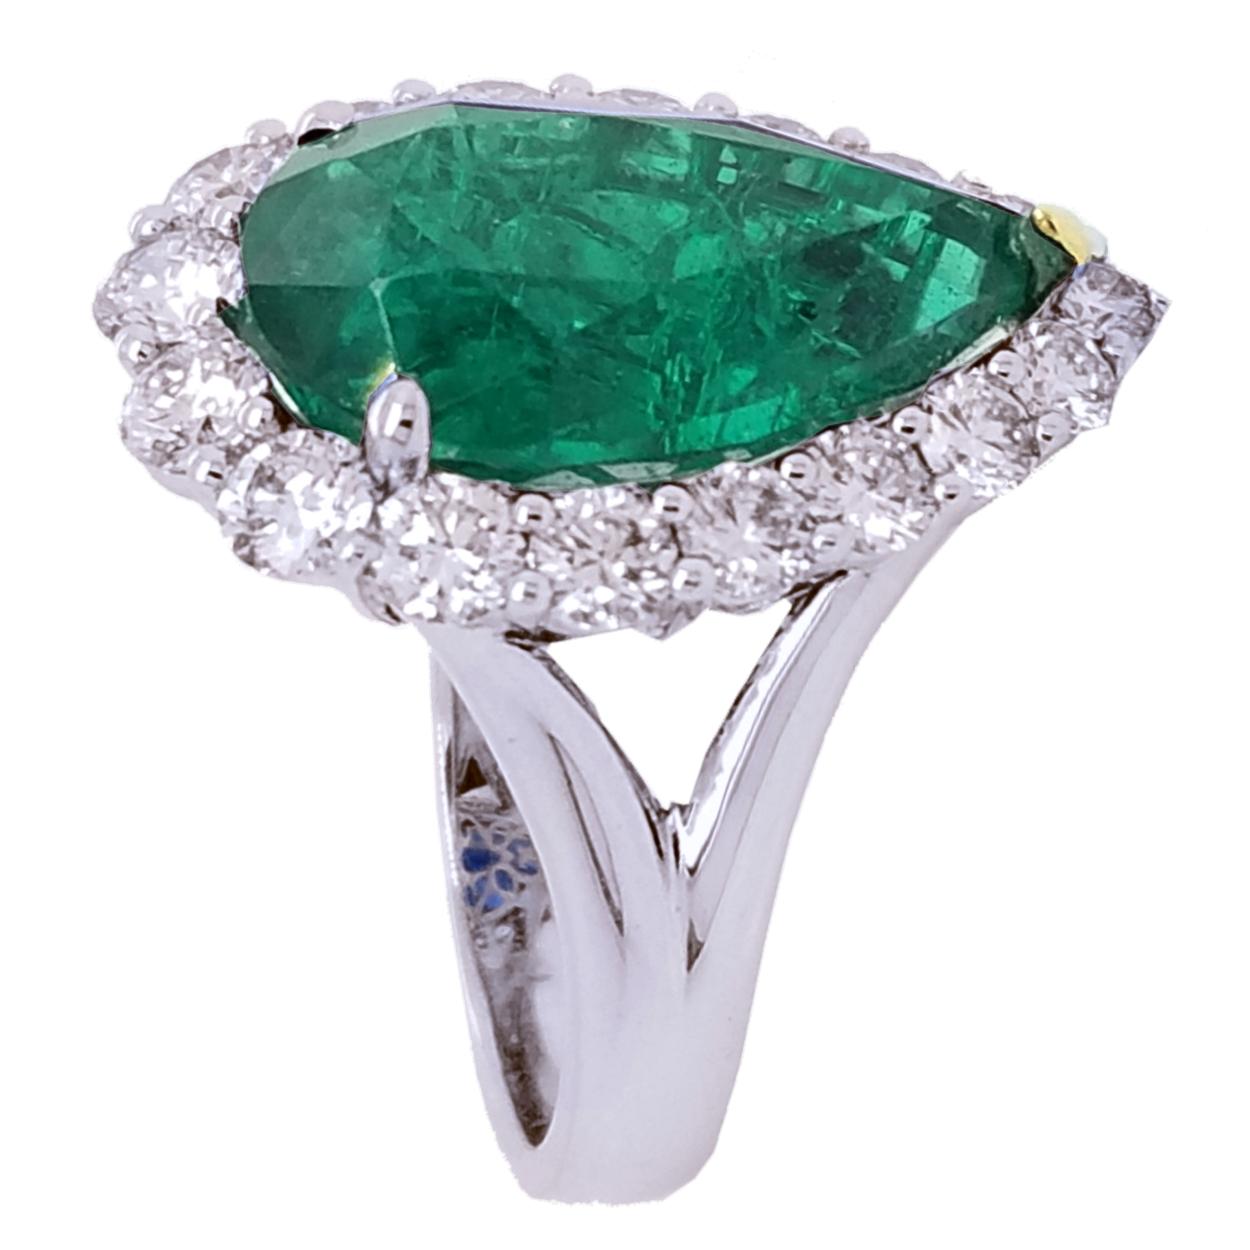 A beautiful color GIA Certified 8.90 Ct Pear shaped Emerald  set in the center of an 18K split shank diamond Engagement Ring with a Halo to create great contrast. 

Details:
Center Stone: GIA certified 8.90 carat Pear shaped Emerald
Center Stone